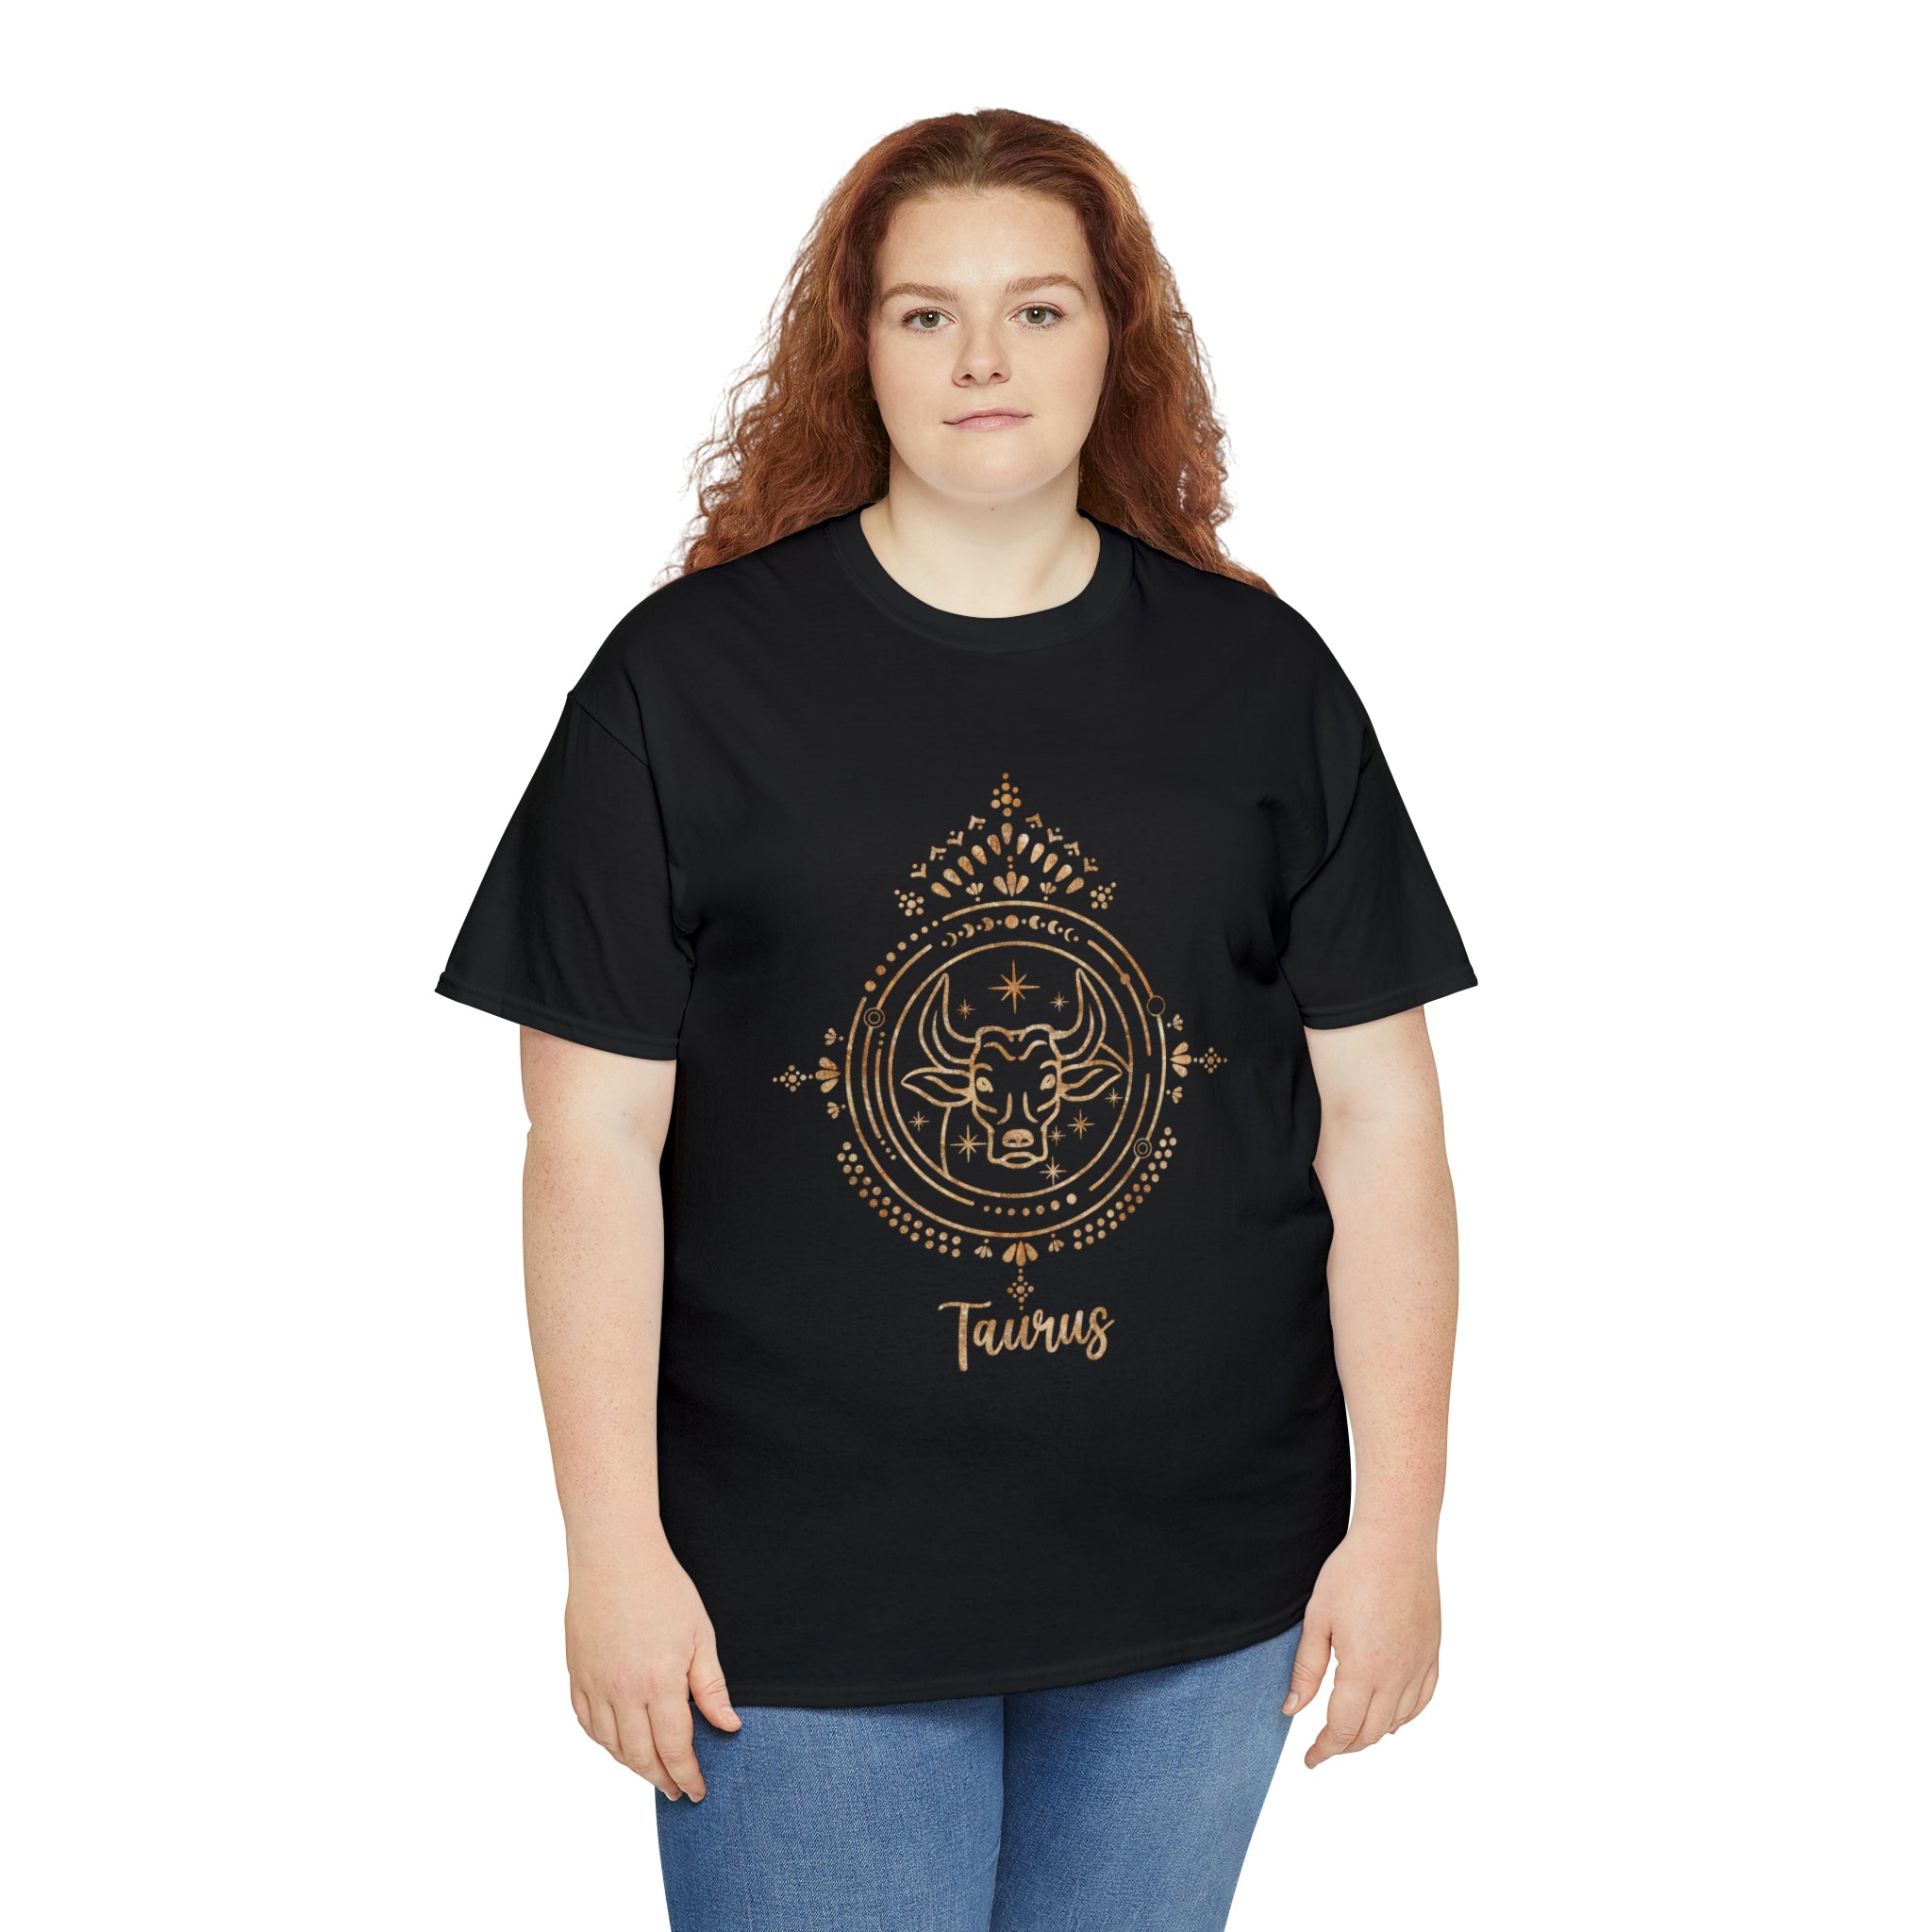 A steadfast woman wearing a Tauruses T-Shirt adorned with a gold design, exhibiting the personality traits of Taurus.